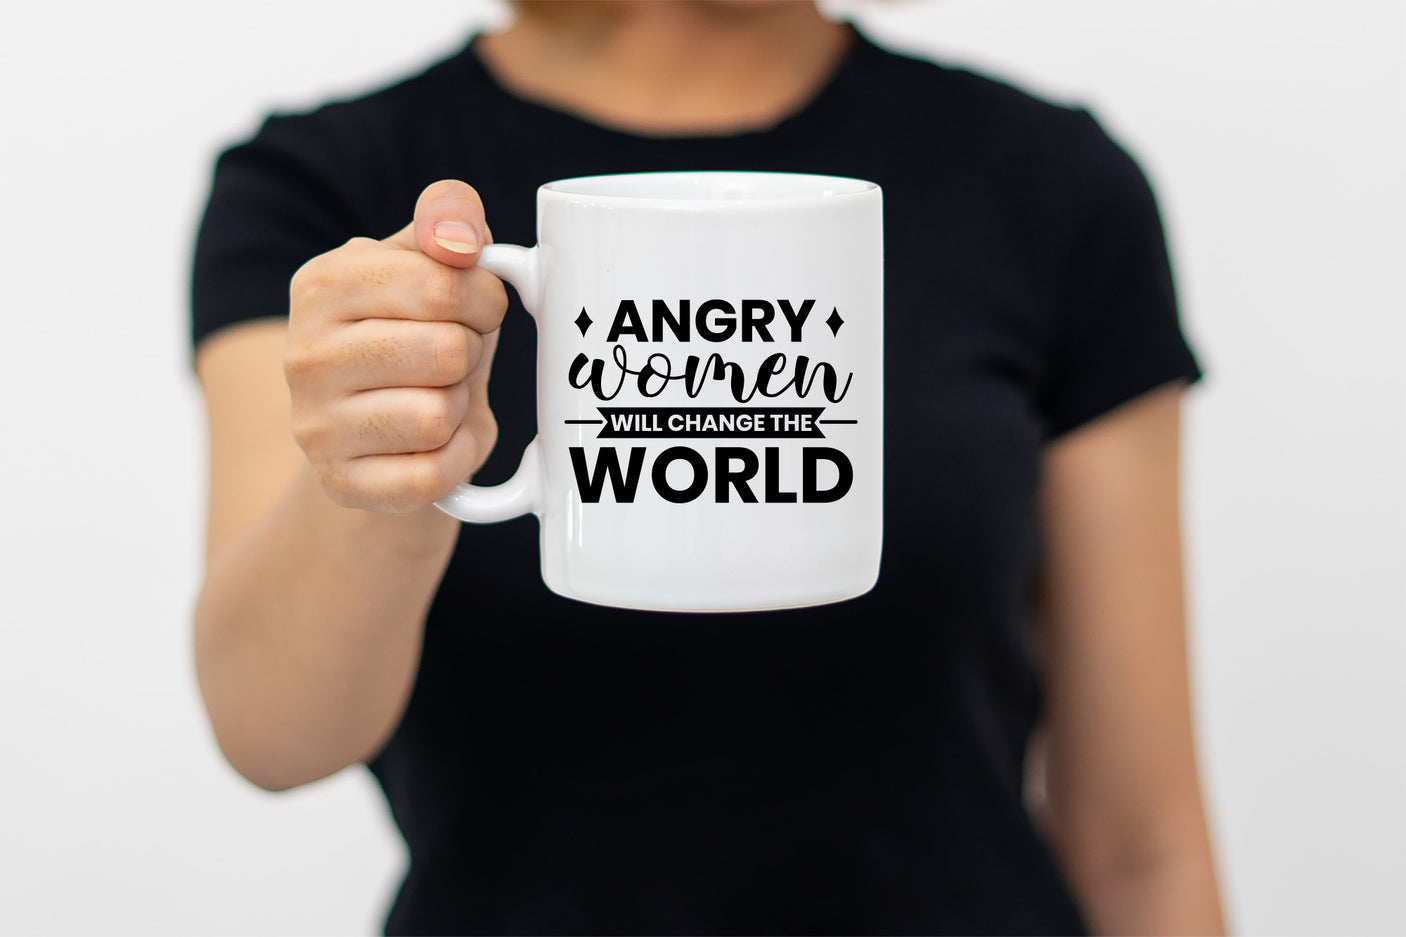 Girl Power SVG - Angry Women Will Change the World